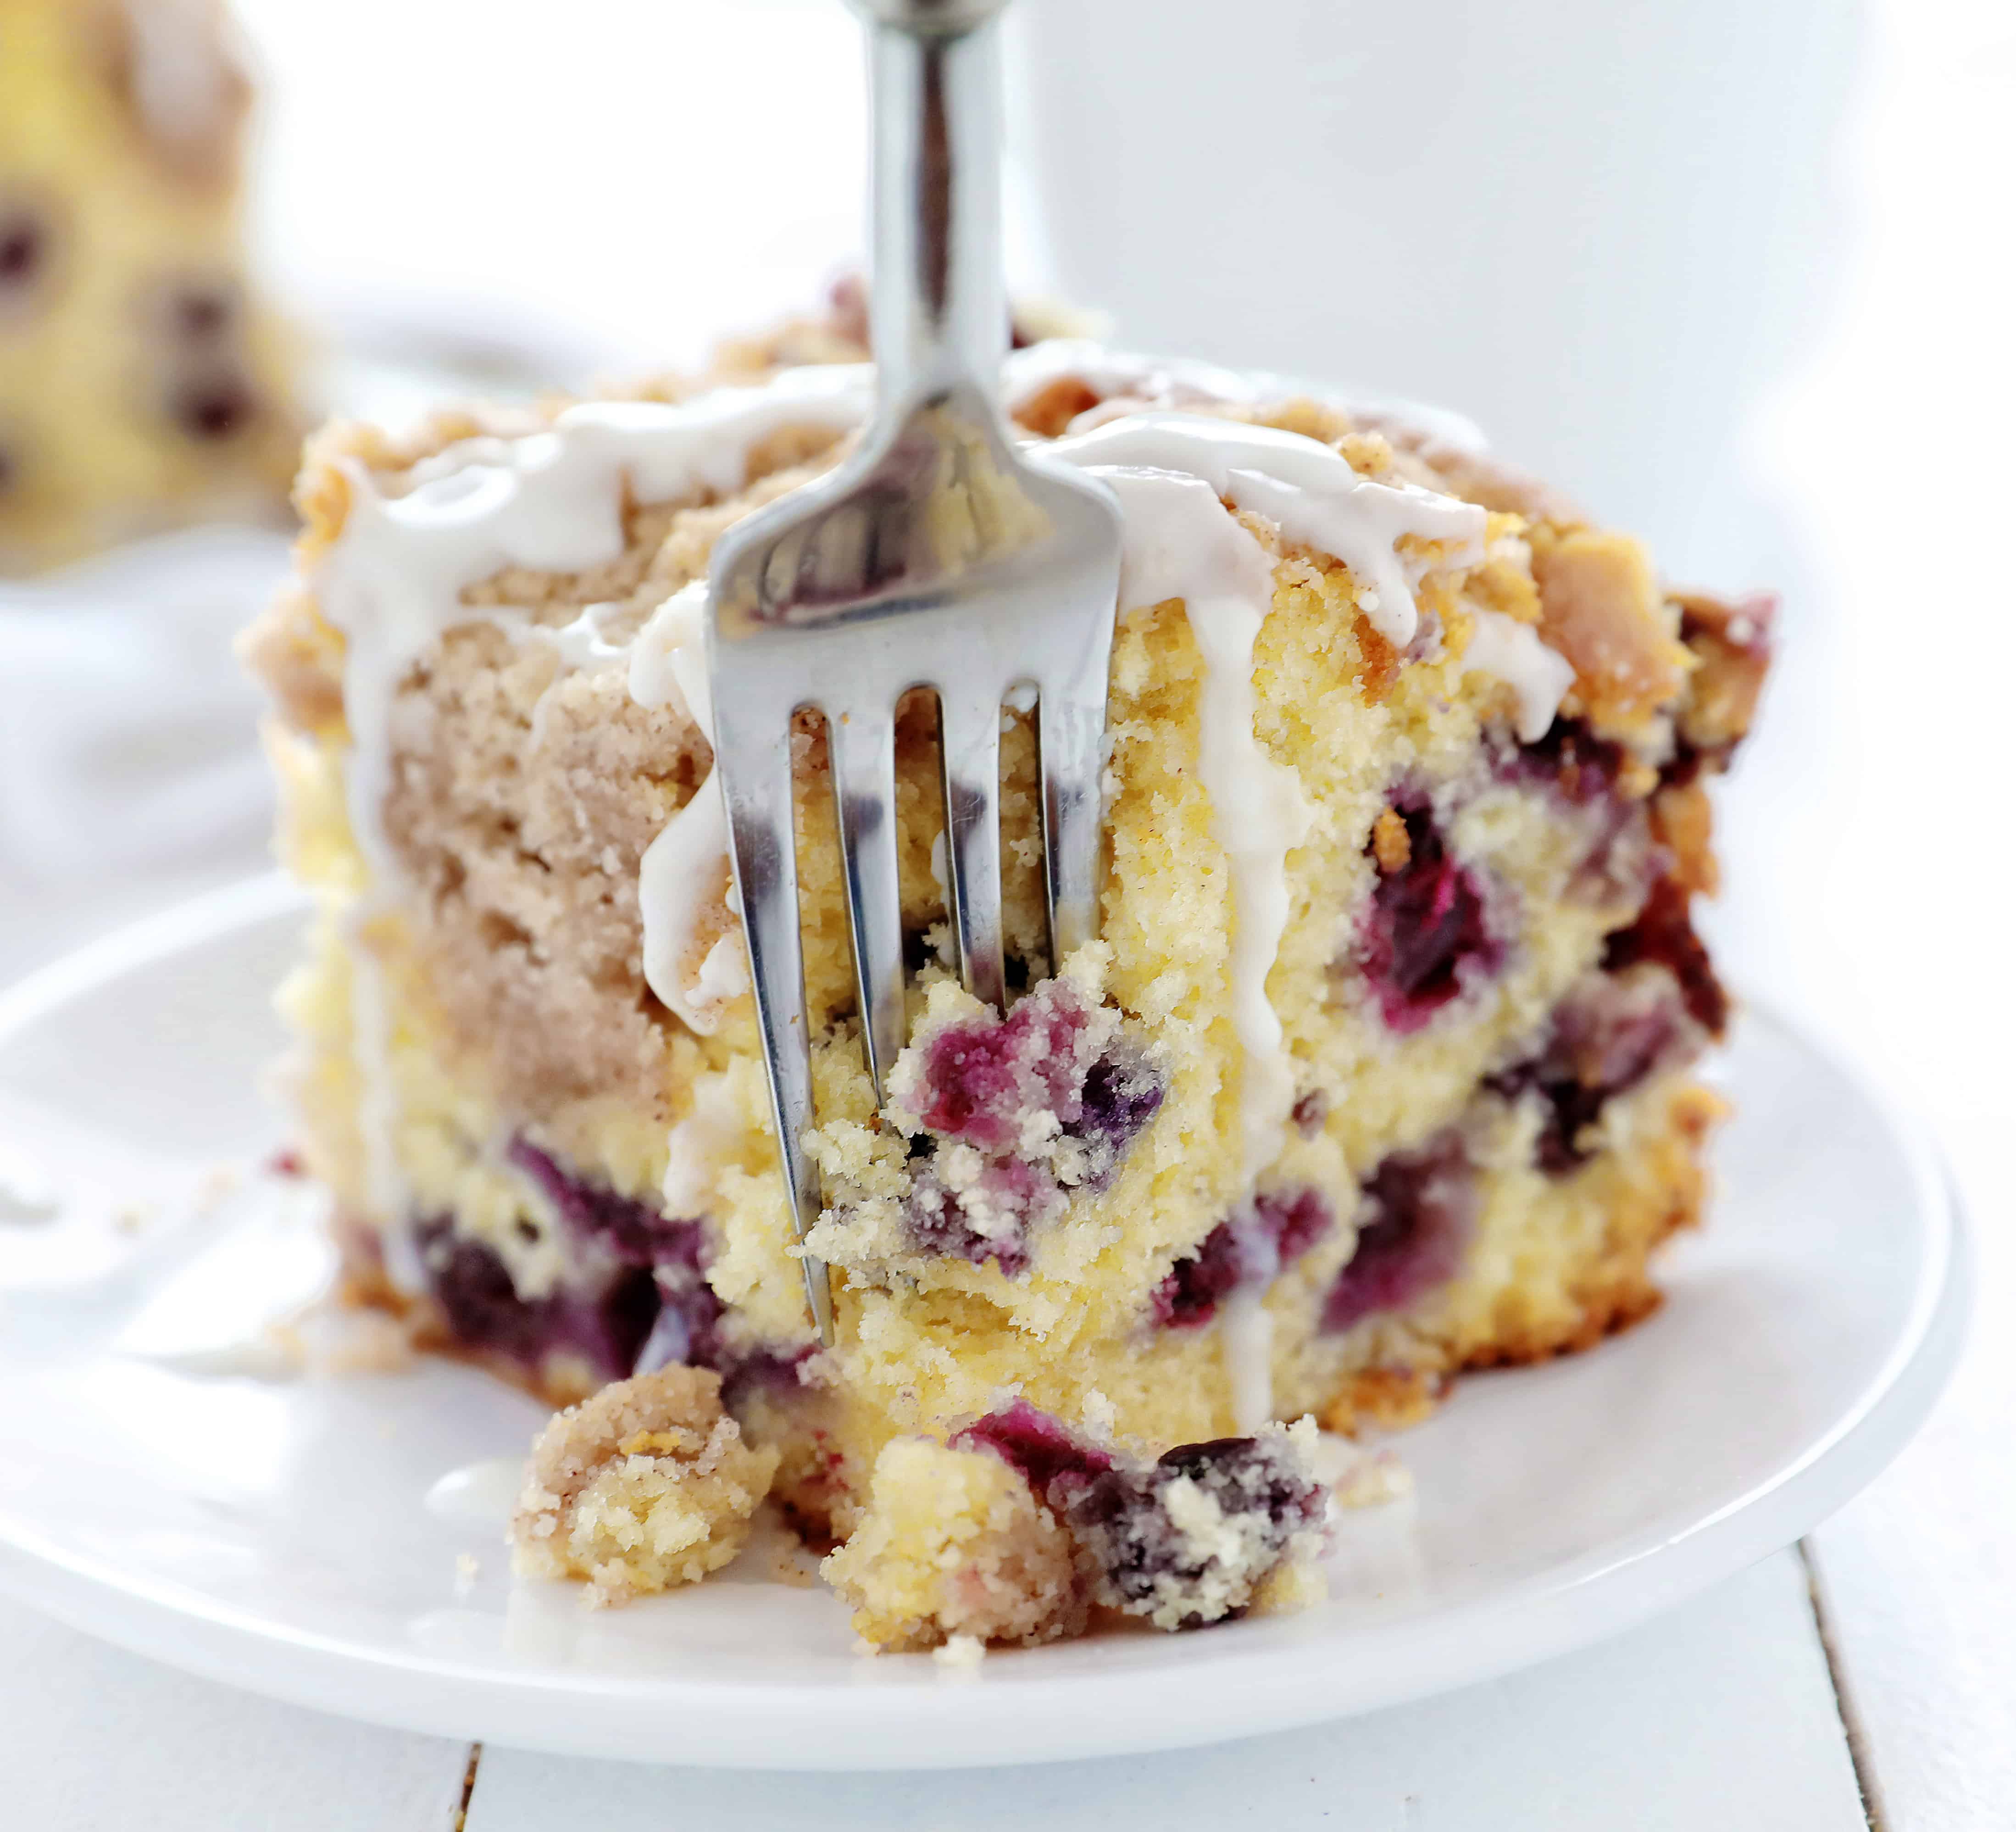 Blueberry Coffee Cake on White Plate with Fork Removing a Bite